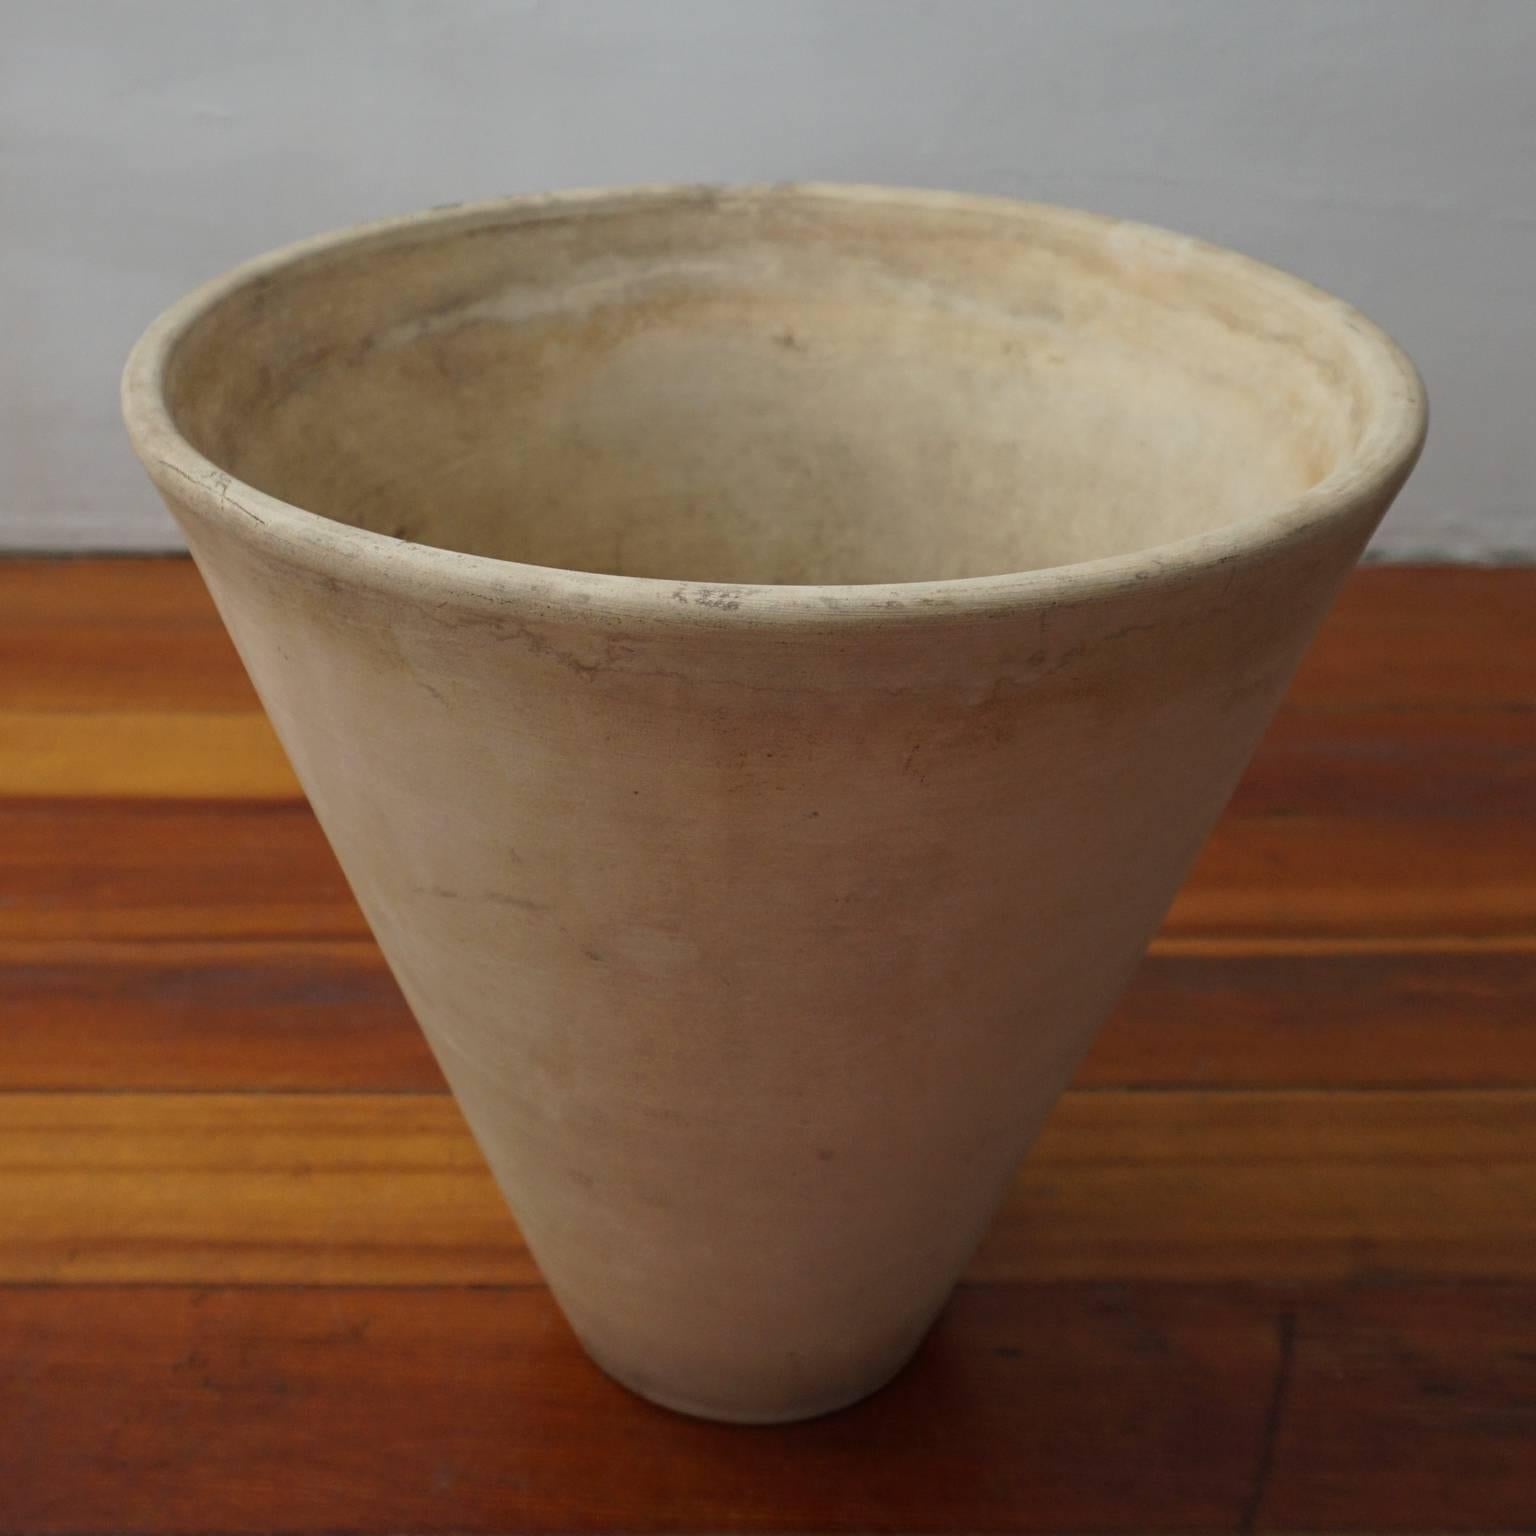 La Gardo Tackett for Architectural Pottery Cone Planter with Wood Stand 2